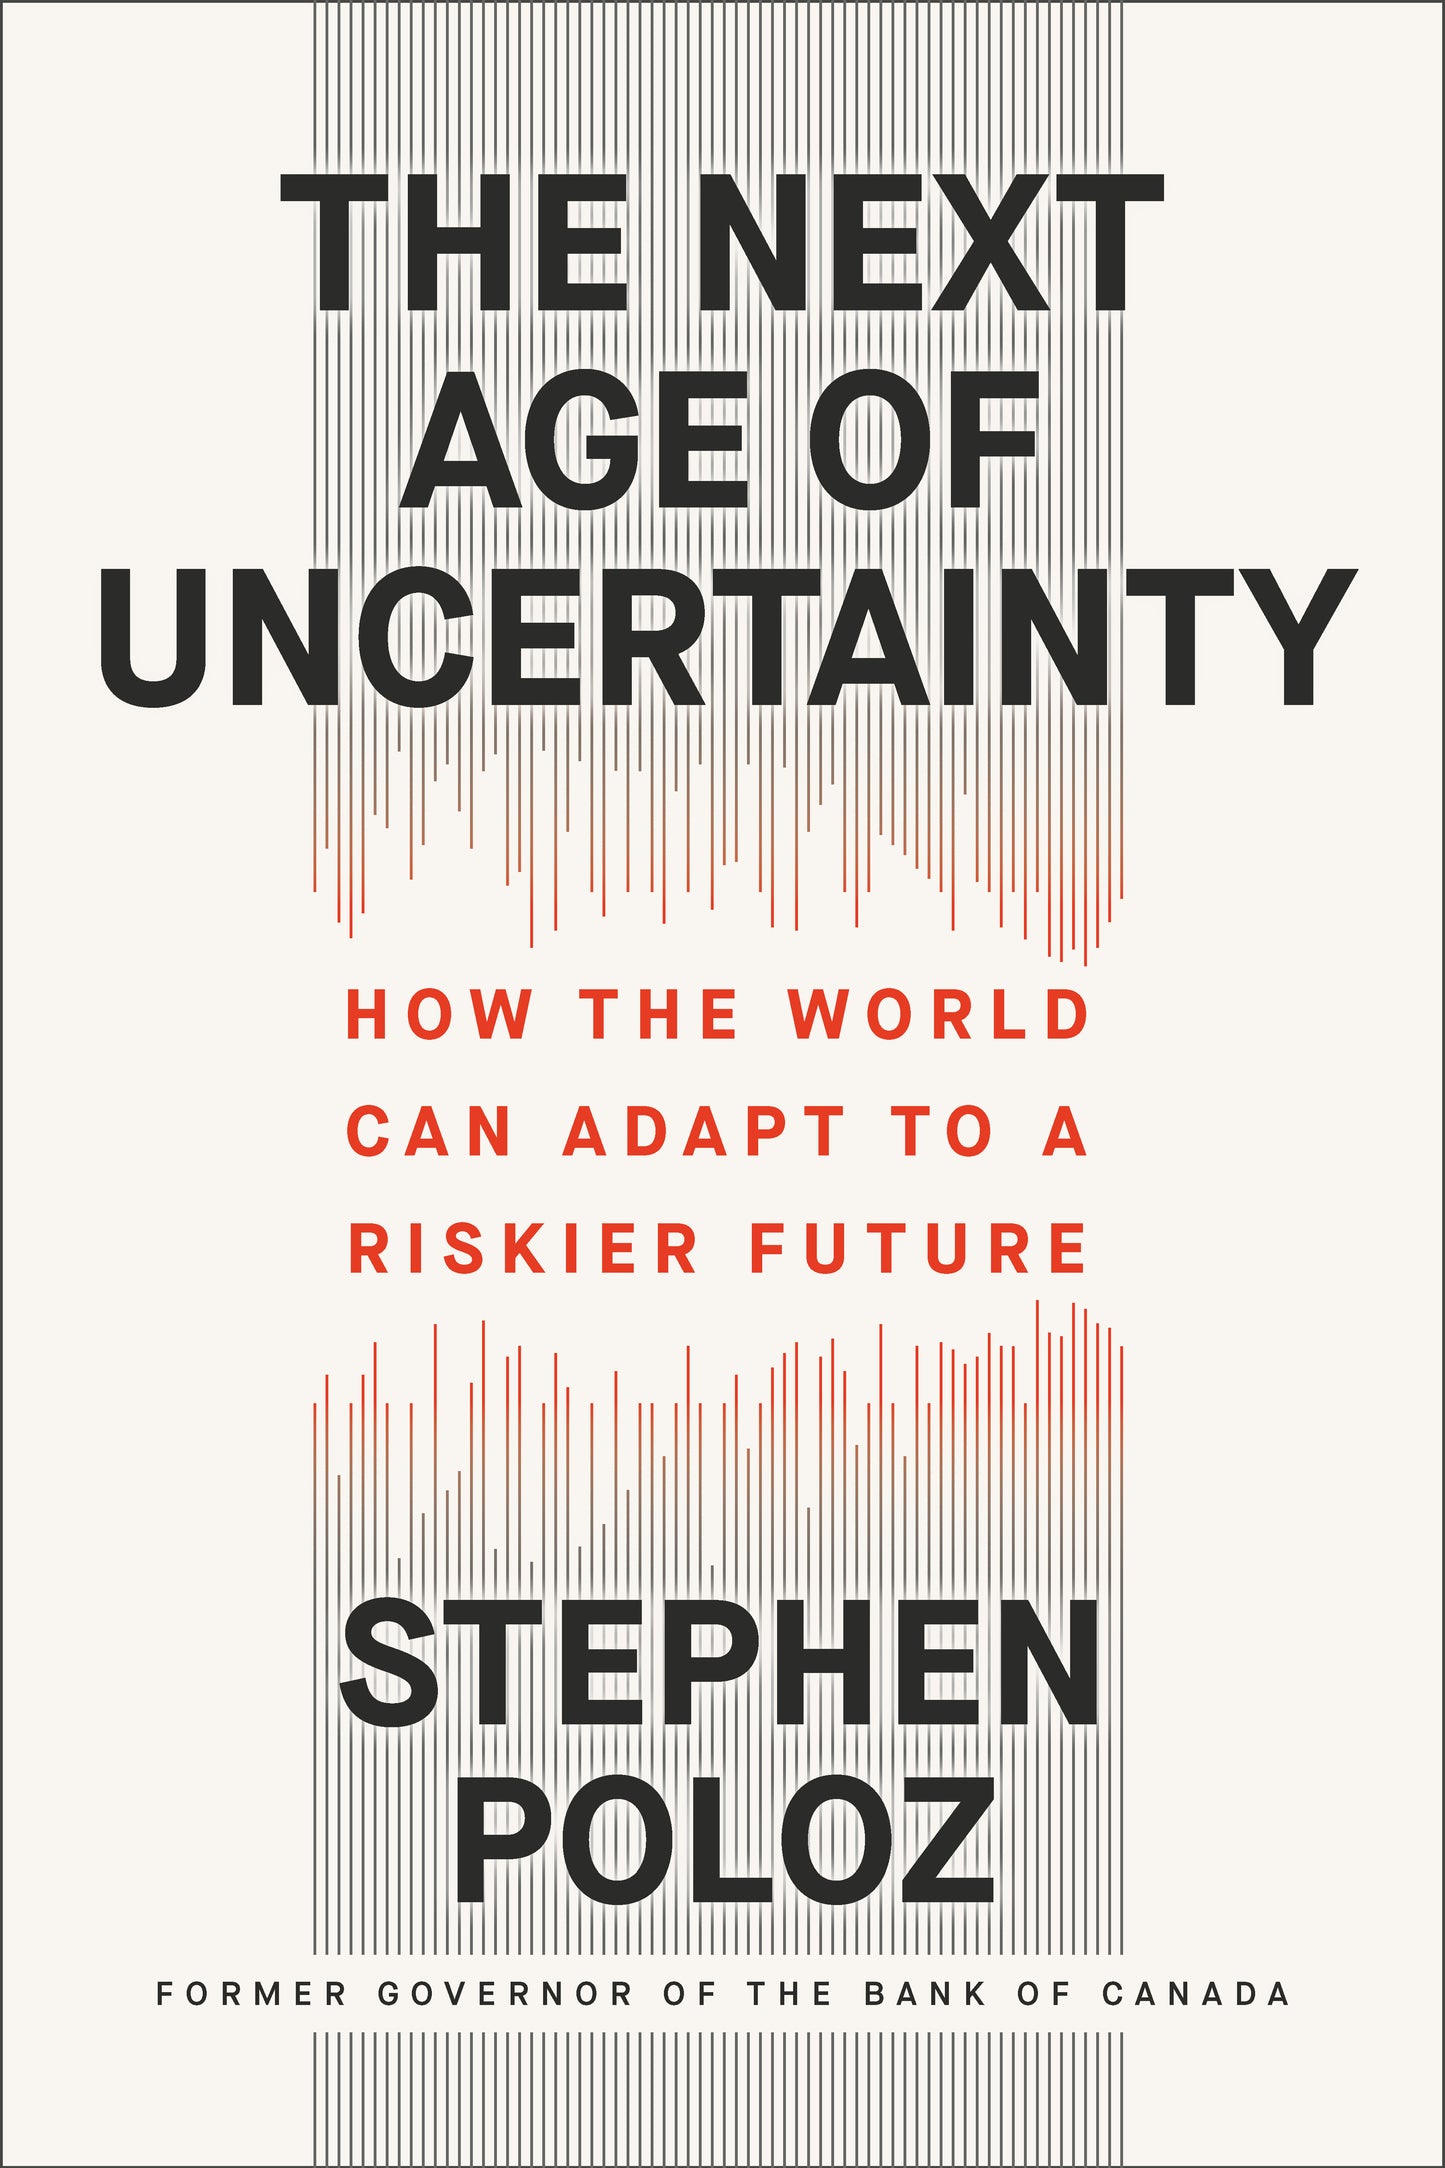 The Next Age of Uncertainty